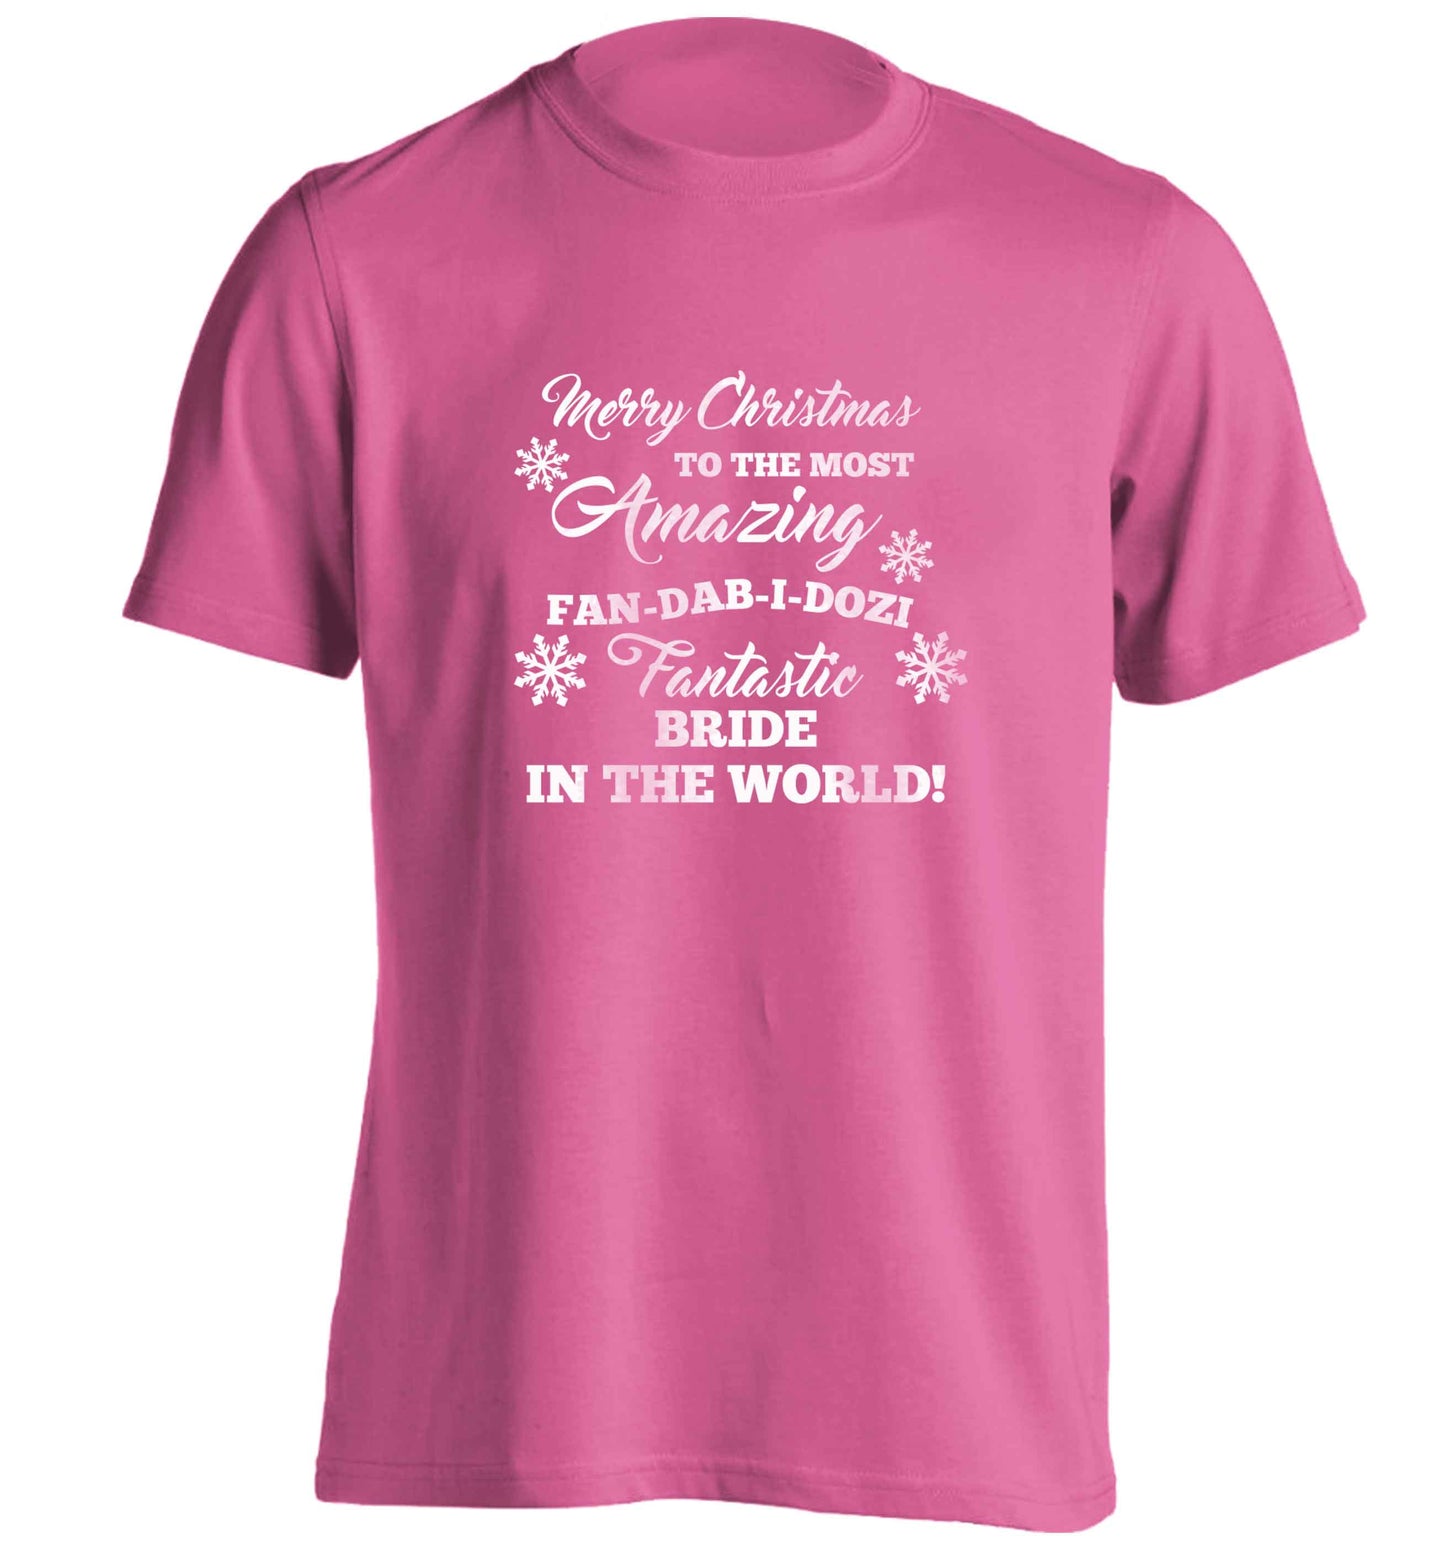 Merry Christmas to the most amazing bride in the world! adults unisex pink Tshirt 2XL